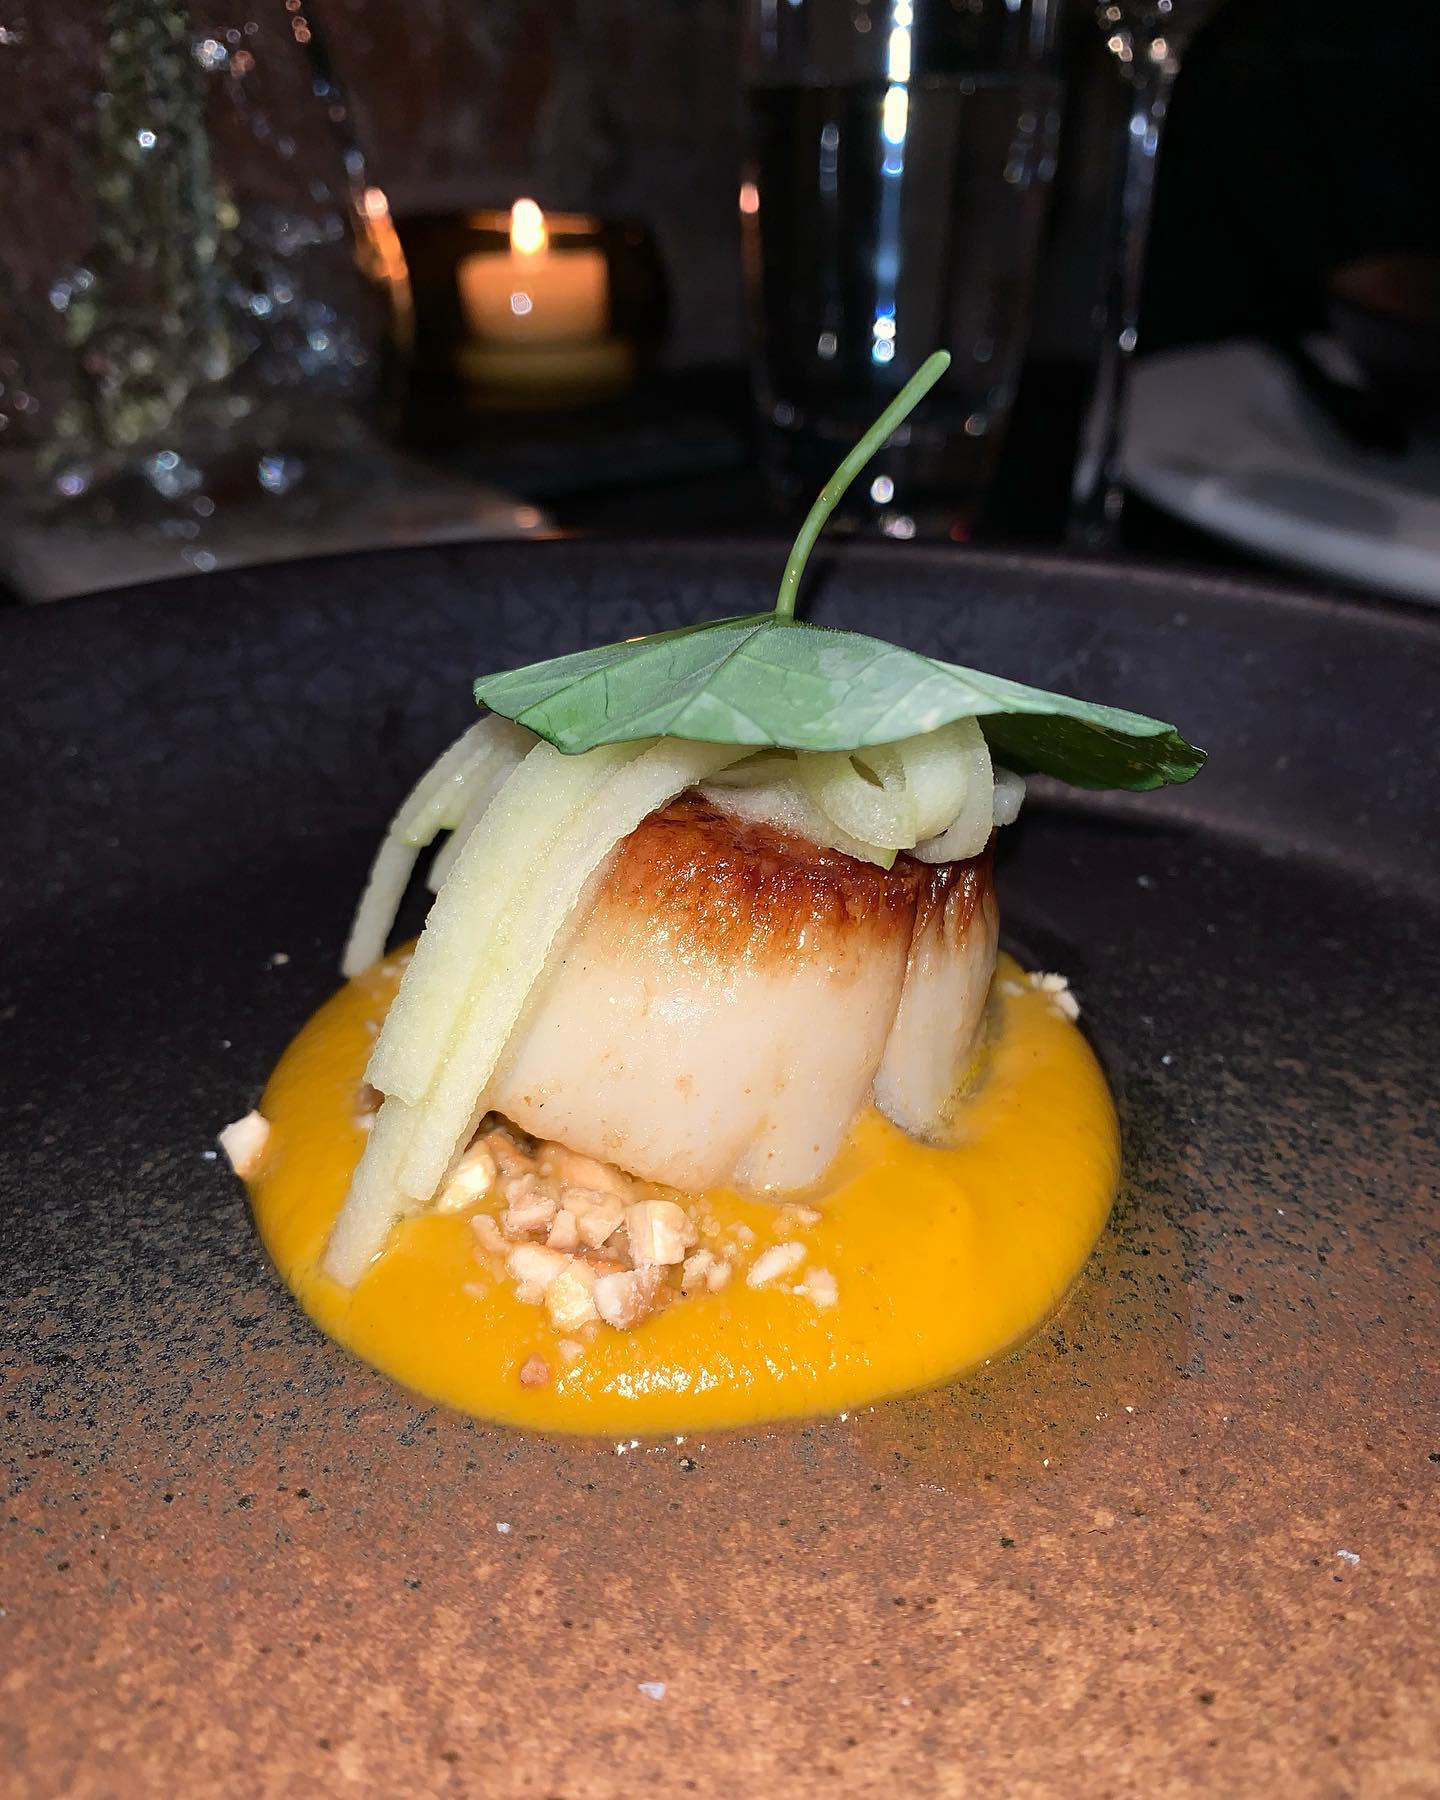 Official Foodie - Nothing better than a cute plump scallop…and an 8 course meal with wine pairings a